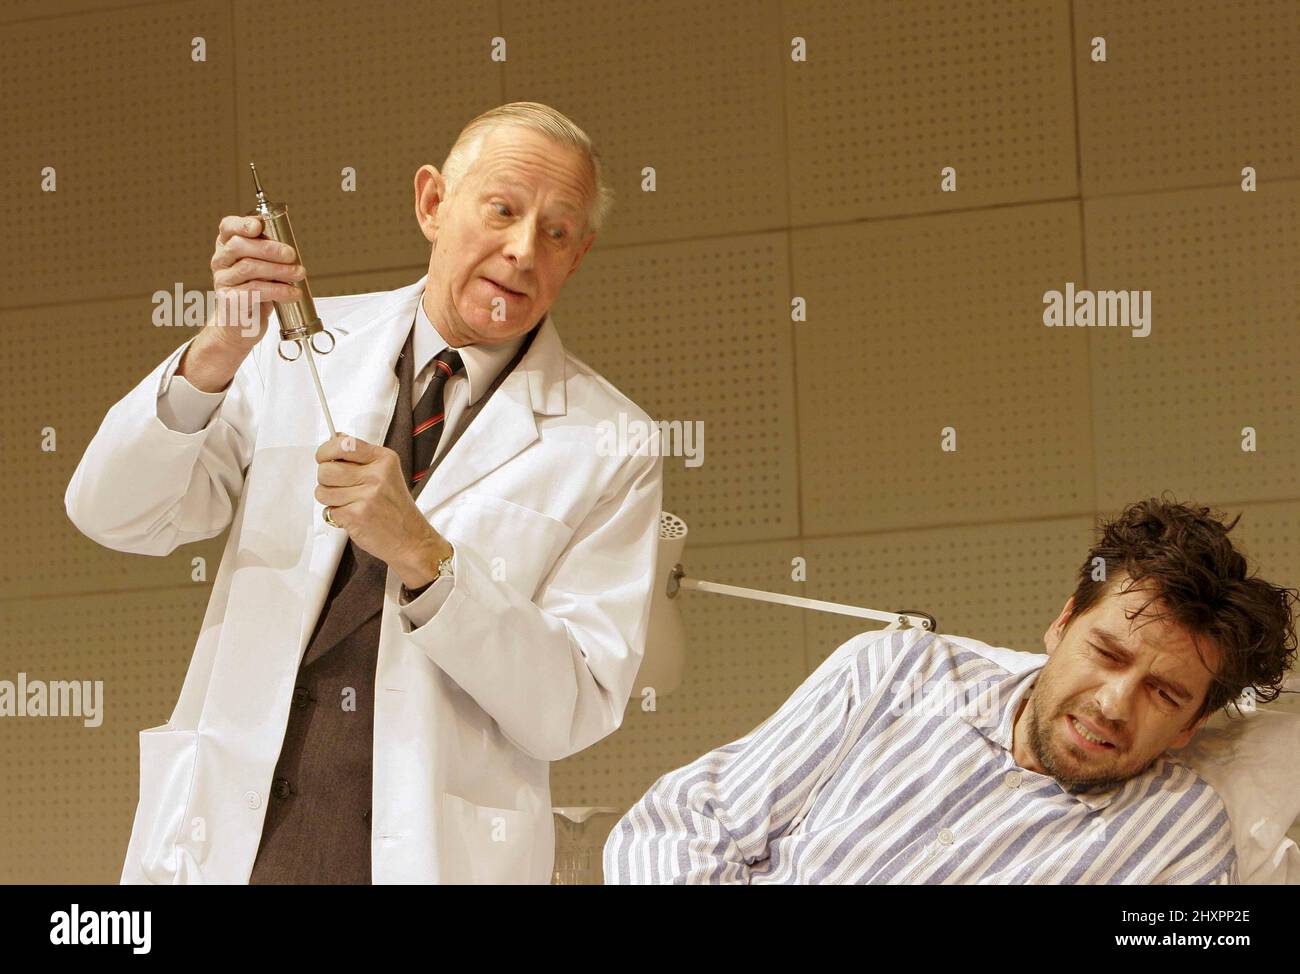 l-r: Jeremy Child (Doctor), James Clyde (Spike Milligan) in YING TONG by Roy Smiles at the West Yorkshire Playhouse, Leeds, England  28/10/2004  design: Peter McKintosh  lighting: Tony Simpson  director: Michael Kingsbury Stock Photo